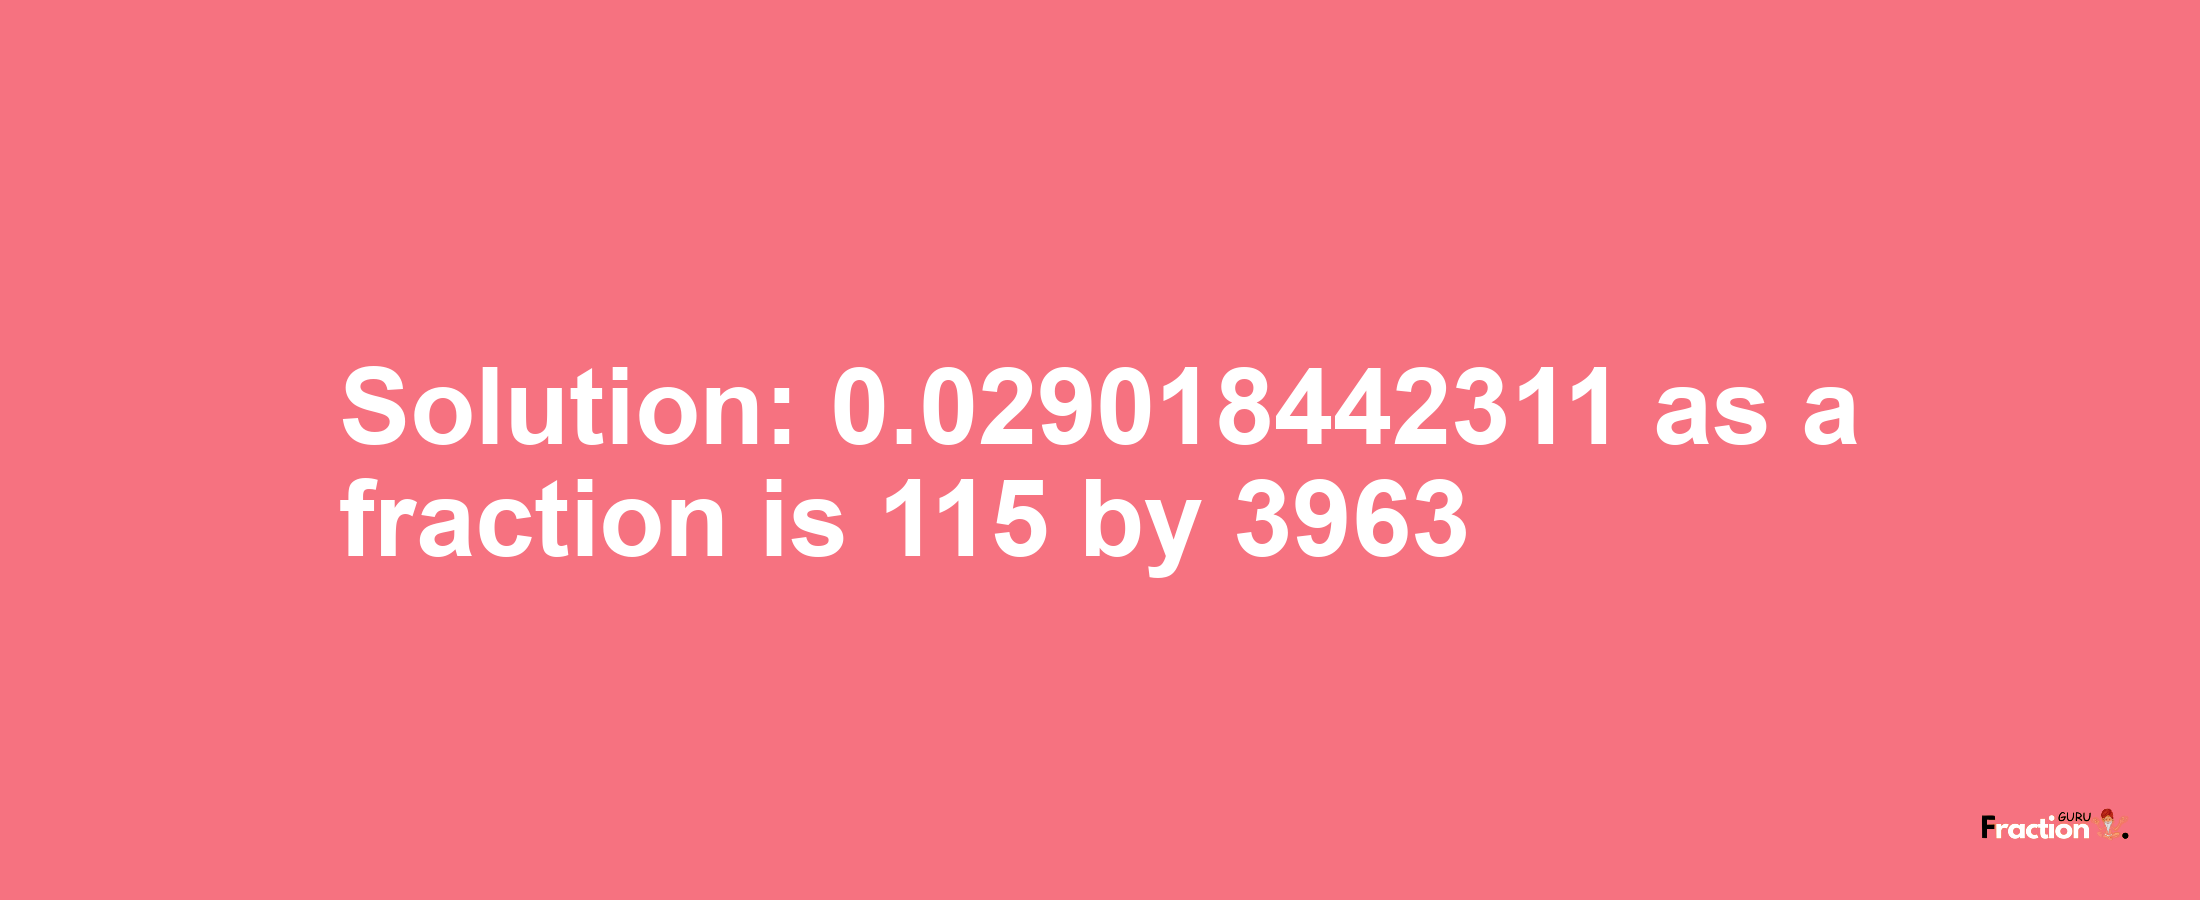 Solution:0.029018442311 as a fraction is 115/3963